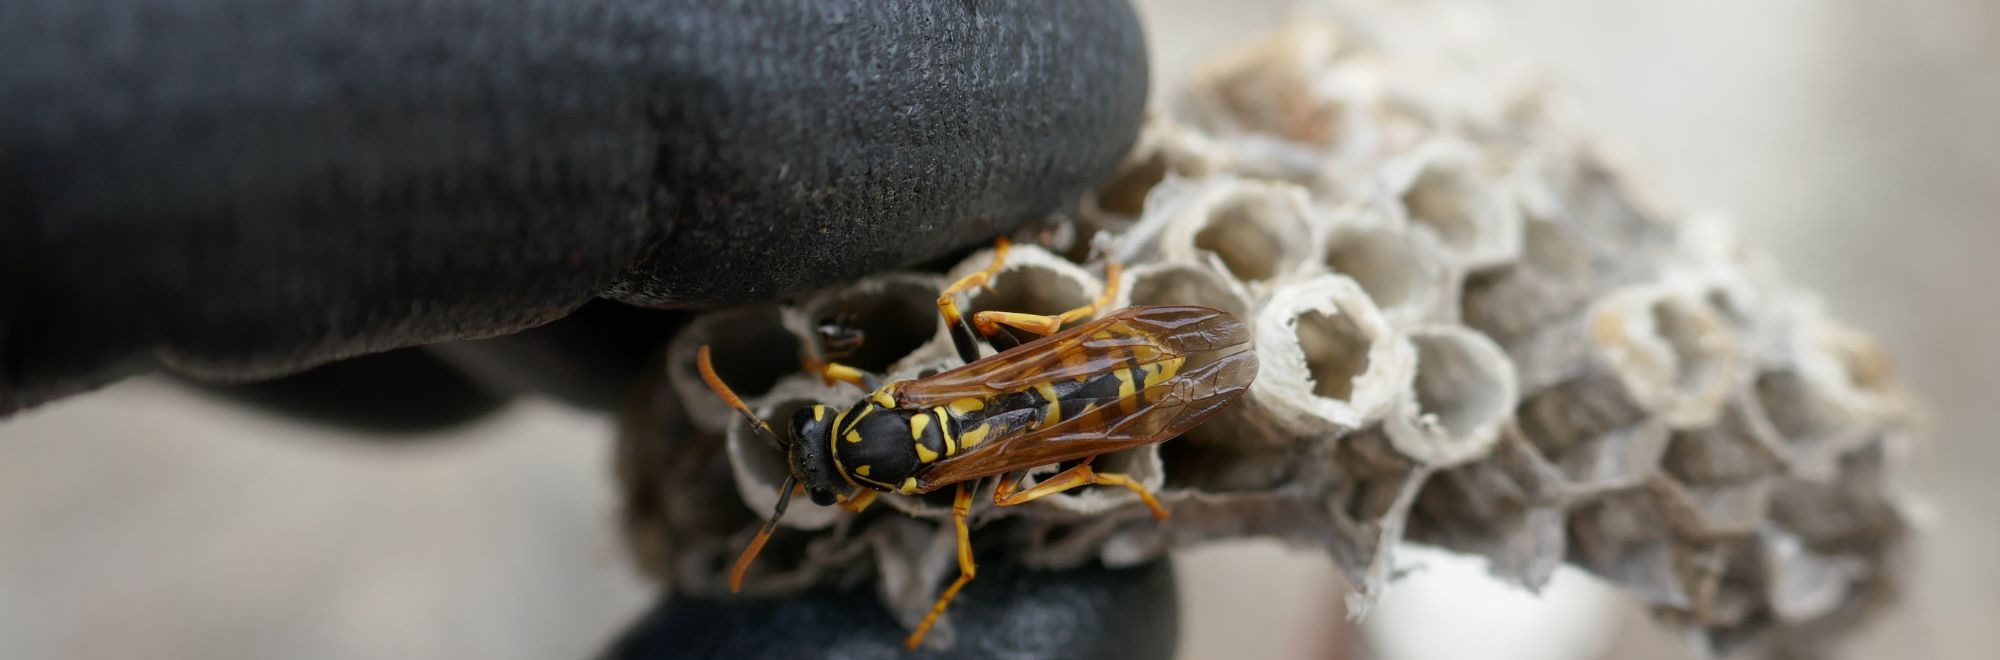 Bees, Wasps, Yellow Jackets & Hornets